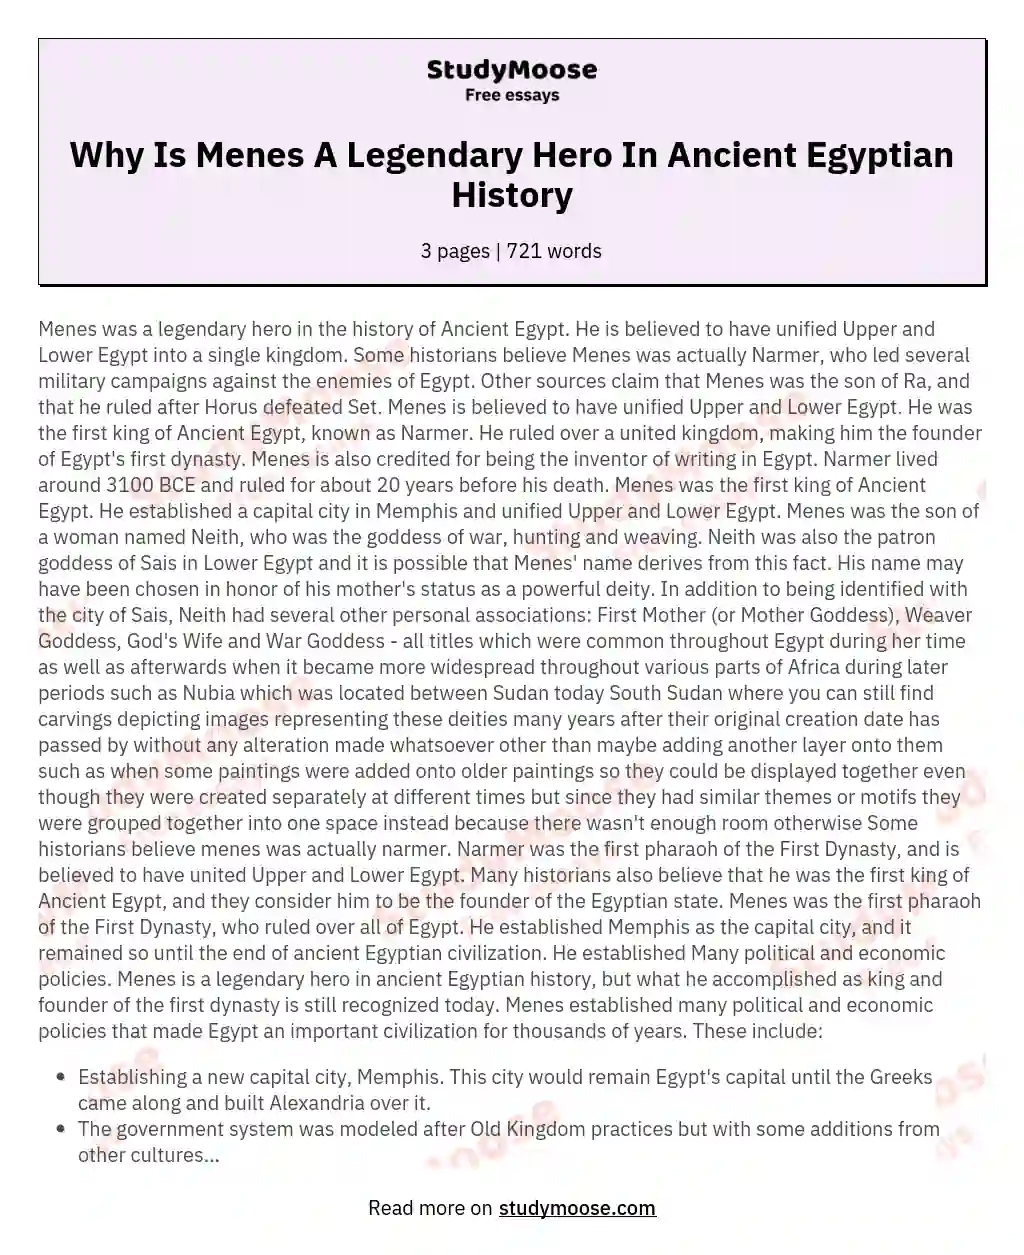 Why Is Menes A Legendary Hero In Ancient Egyptian History essay